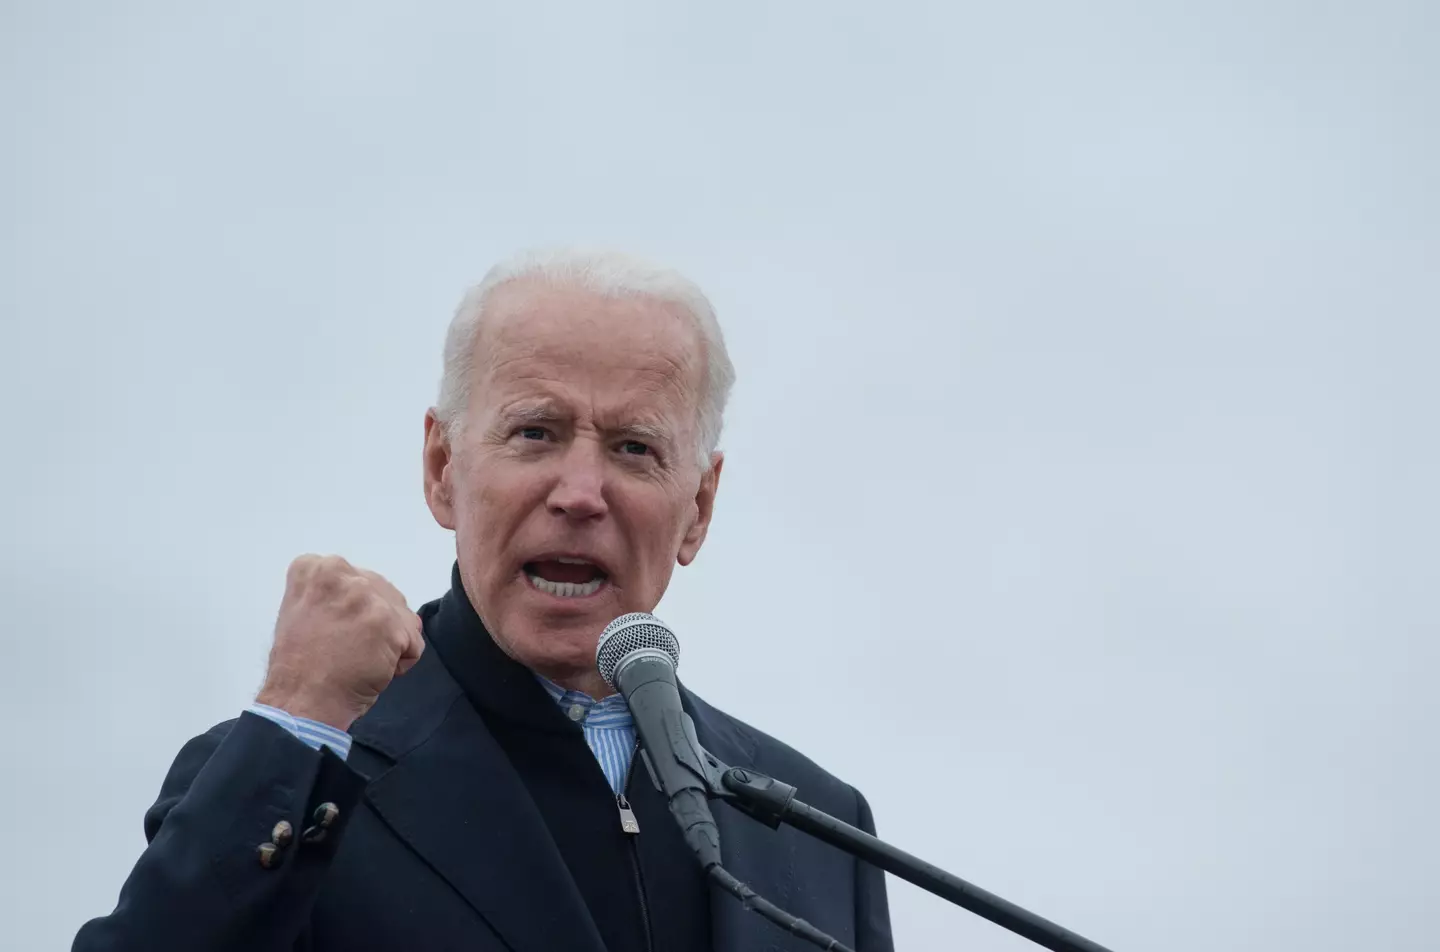 Joe Biden has called for a series of major changes to gun laws in America.